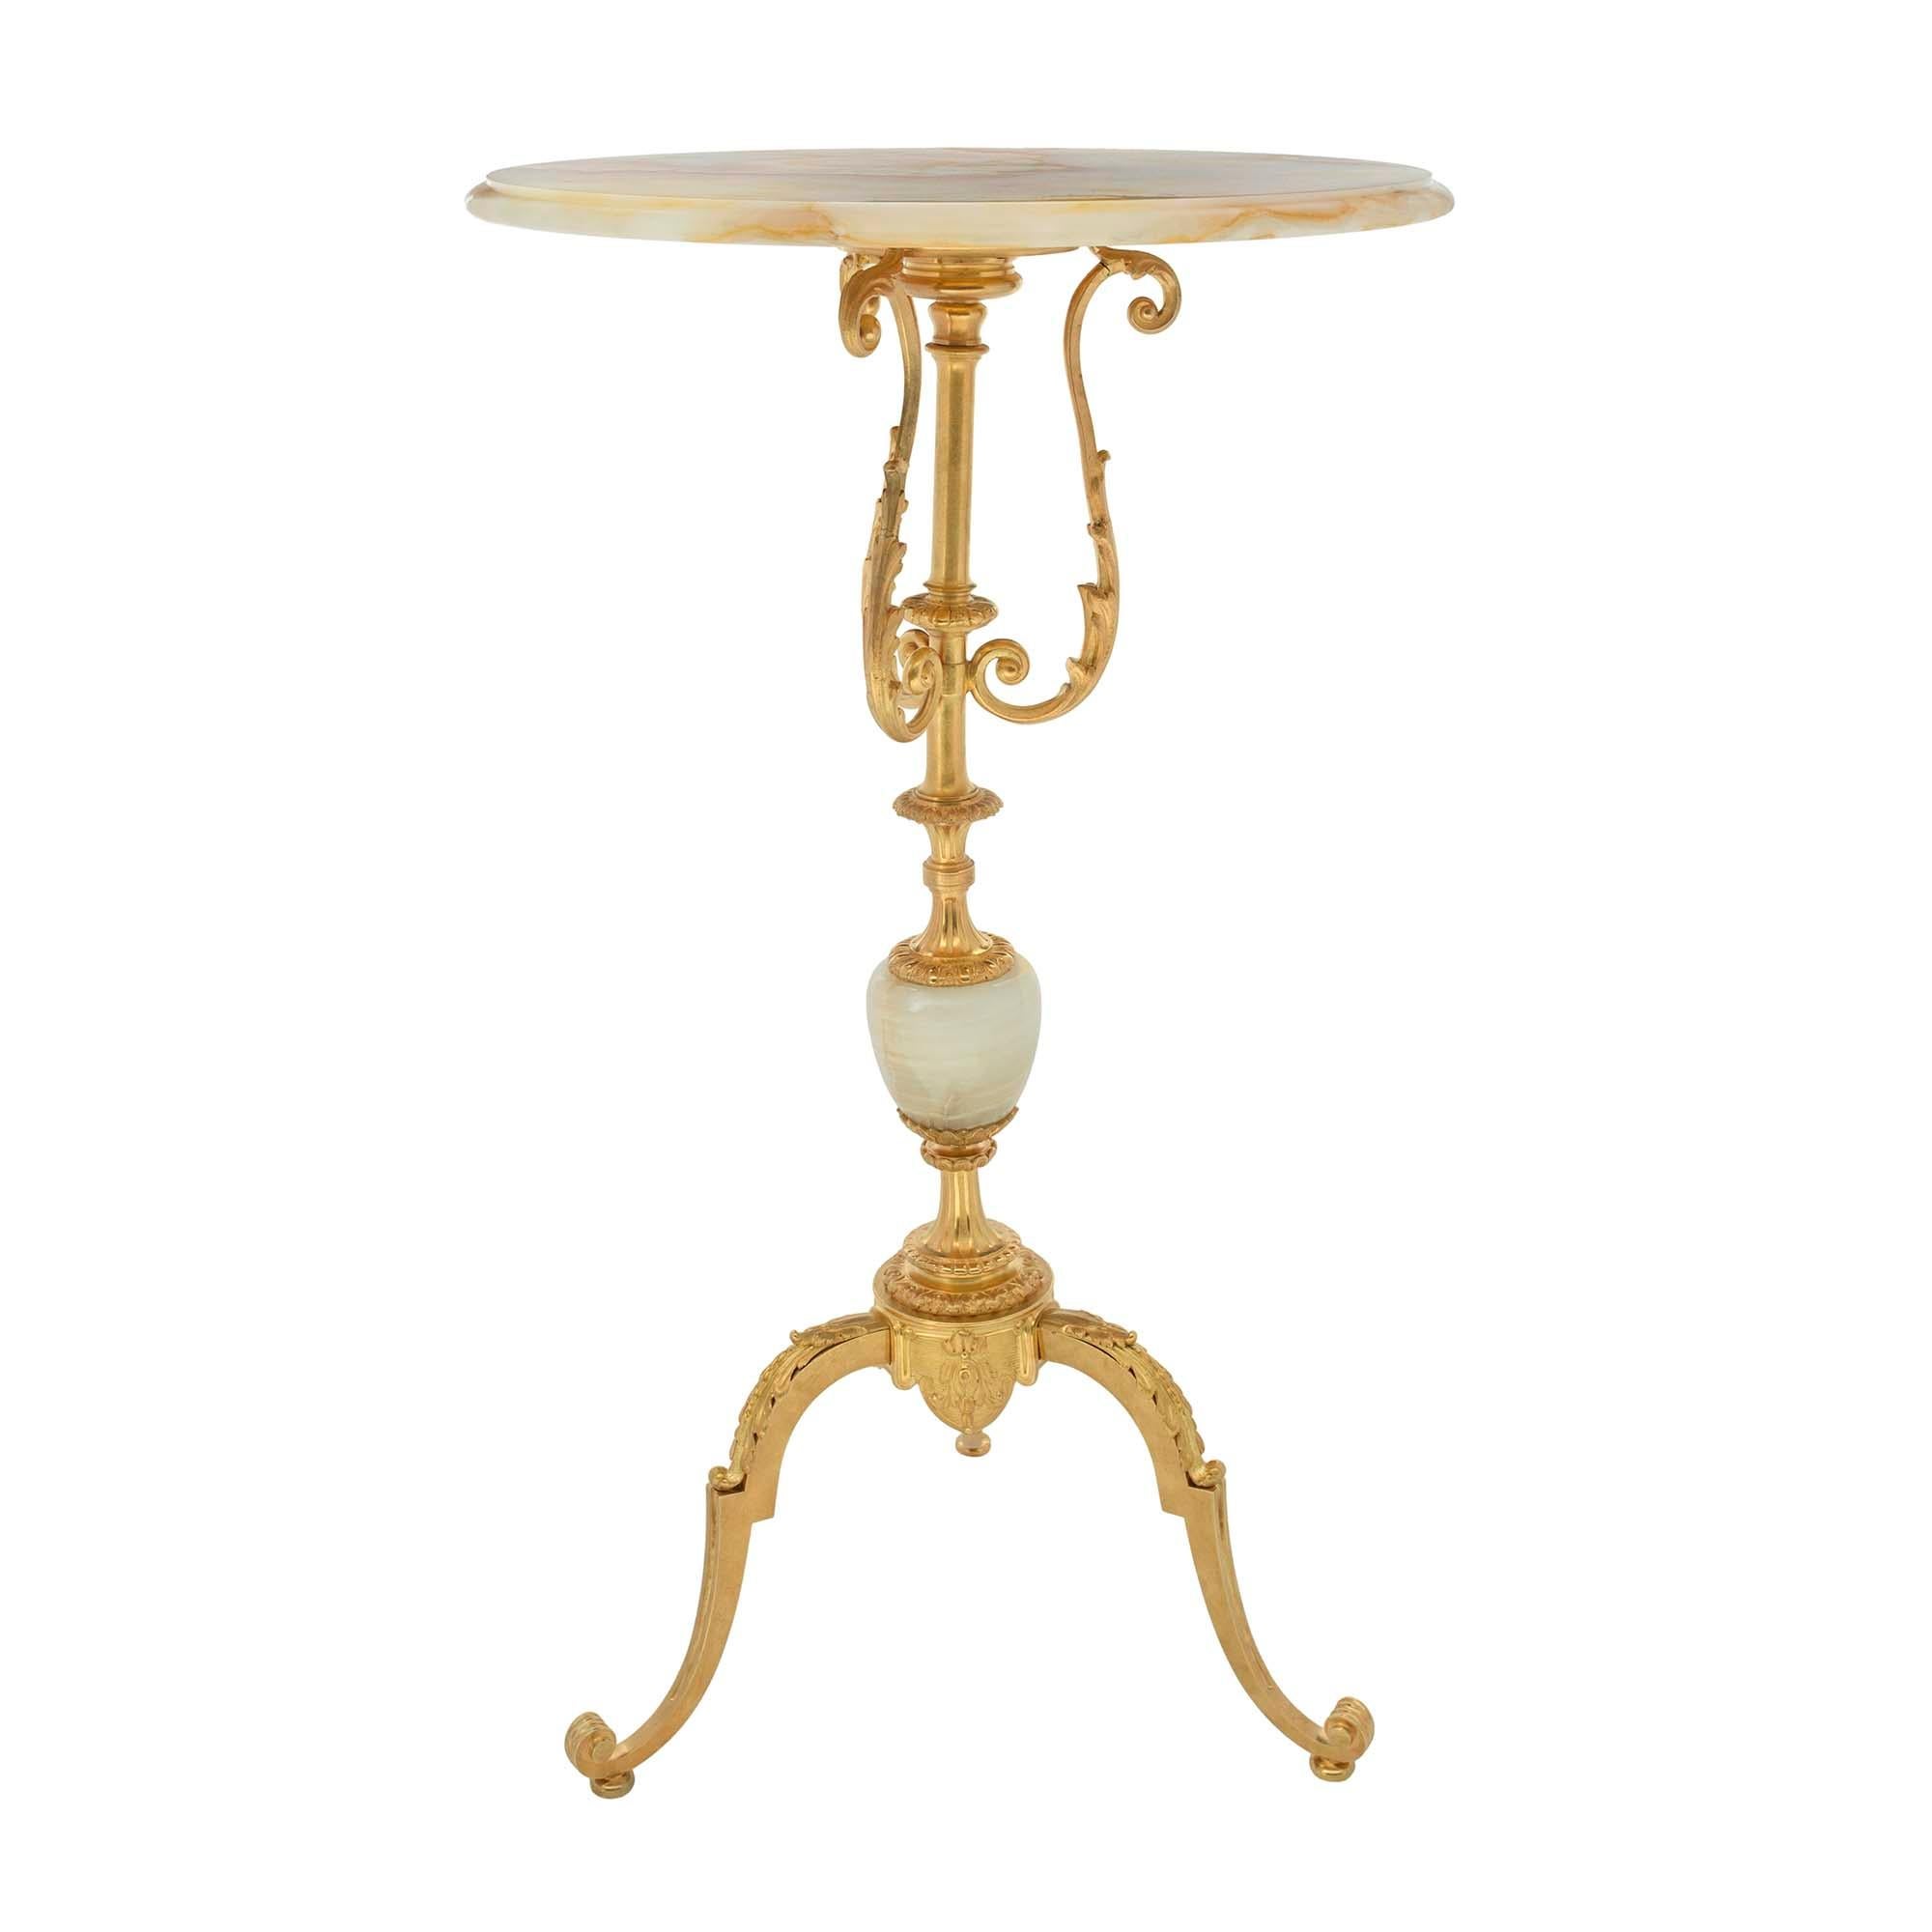 A beautiful and extremely elegant French 19th century Louis XVI st. Napoleon III period onyx and ormolu side table. The table is raised by a scrolled tripod shaped base with a lightly scrolled design and large acanthus leaves. The central support